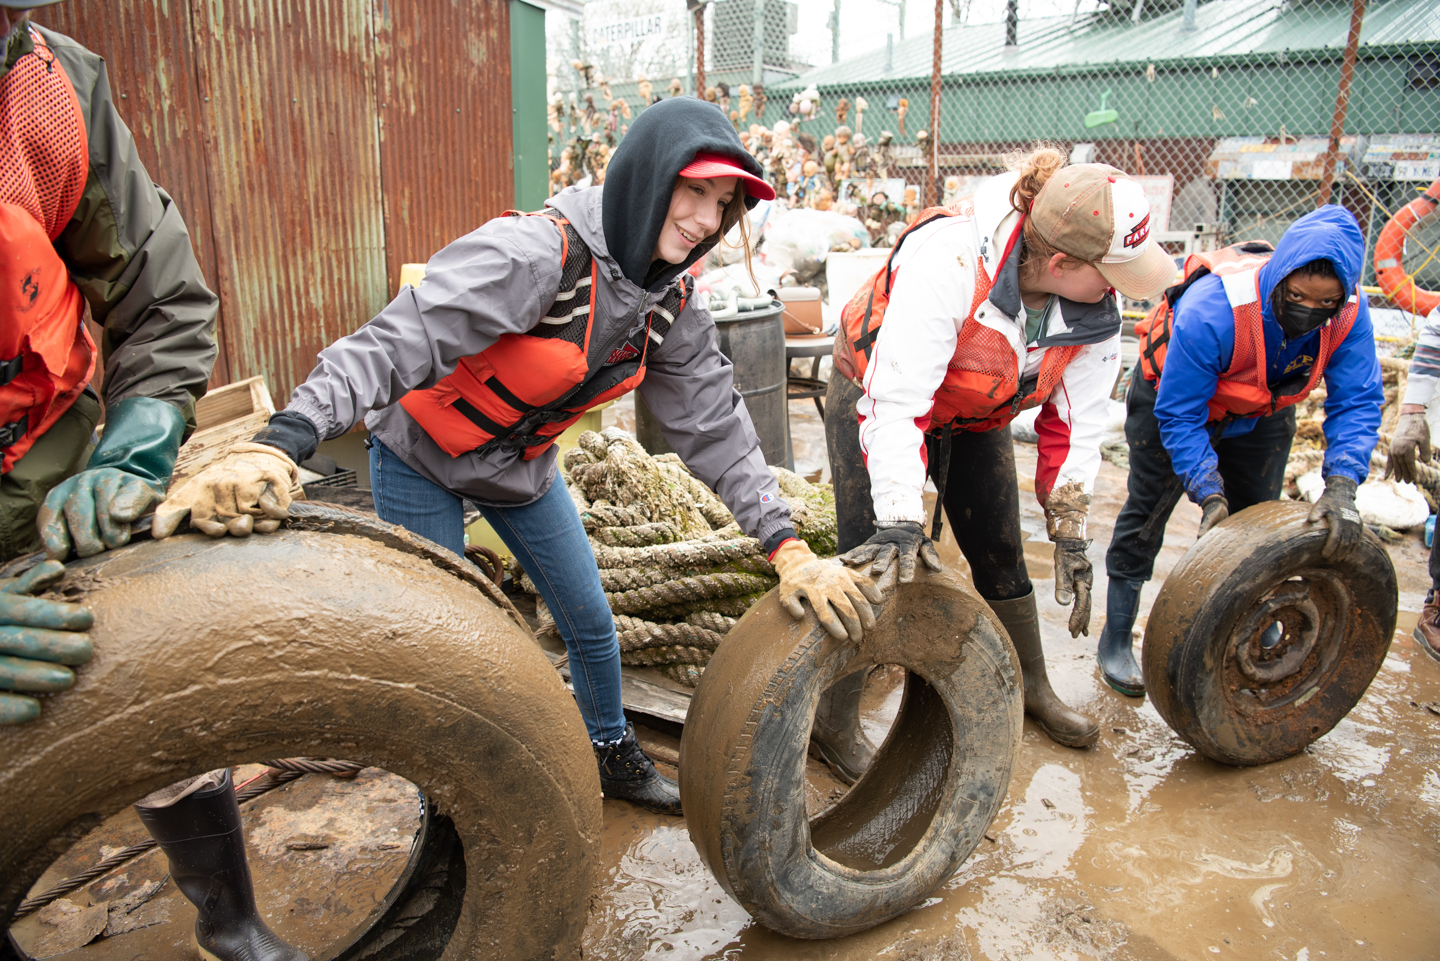 From left, trip leader Cassidy Devine, a freshman management major, Annellia Pierce, a senior philosophy major, and Kaylan Boyd-Harris, a creative technologies graduate student, pass tires down the line as the group works to move over 250 tires from one barge to the other.